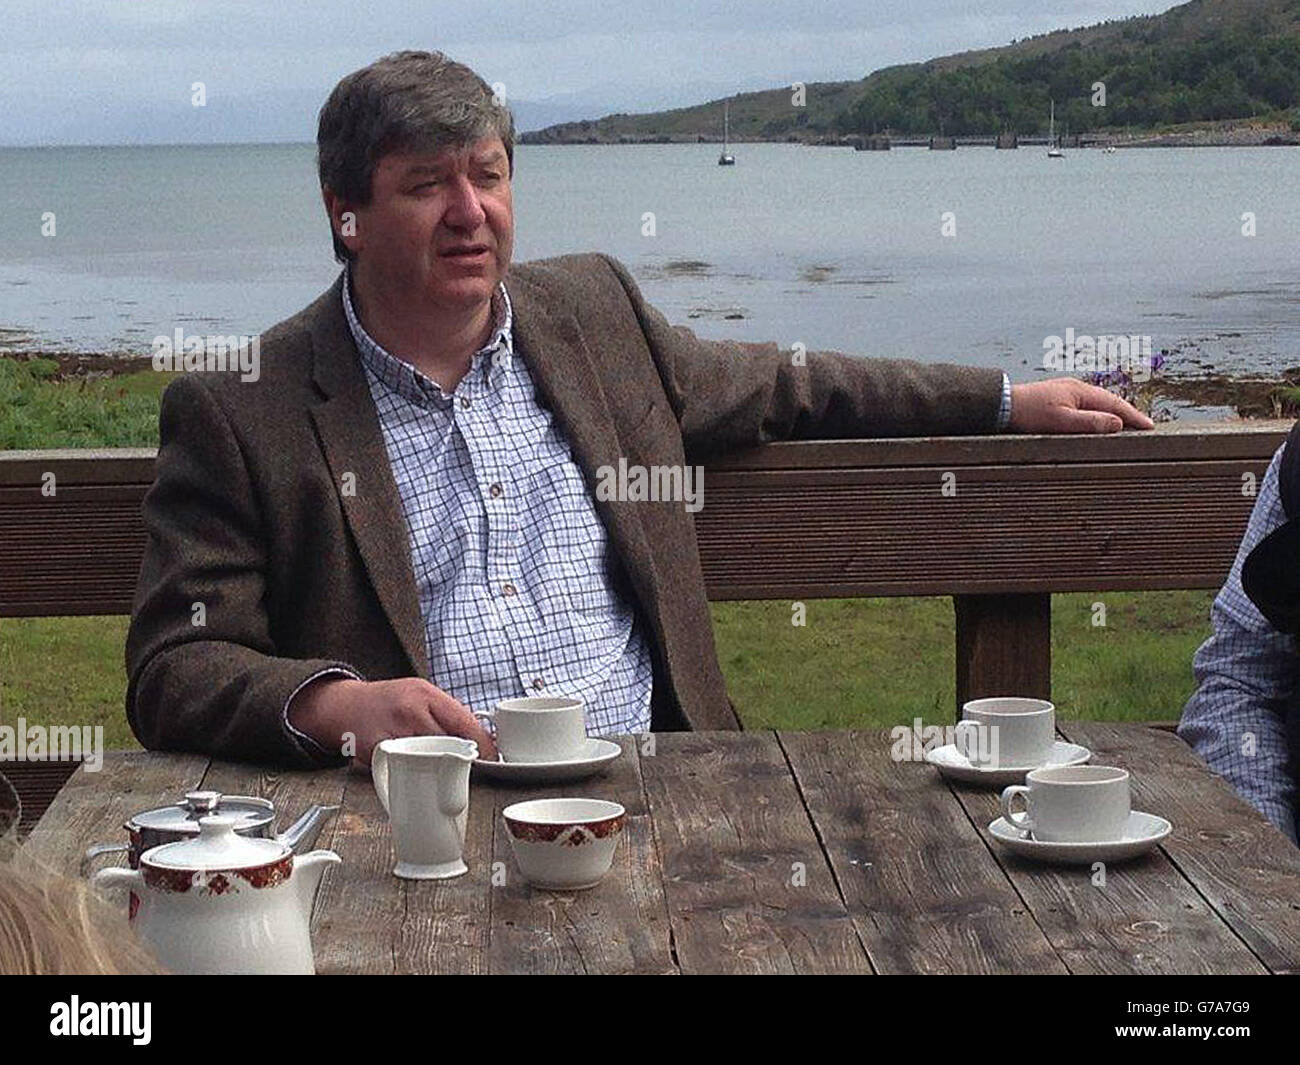 MP for Orkney and Shetland Alistair Carmichael during a visit to the Scottish islands of Rum and Eigg. Stock Photo